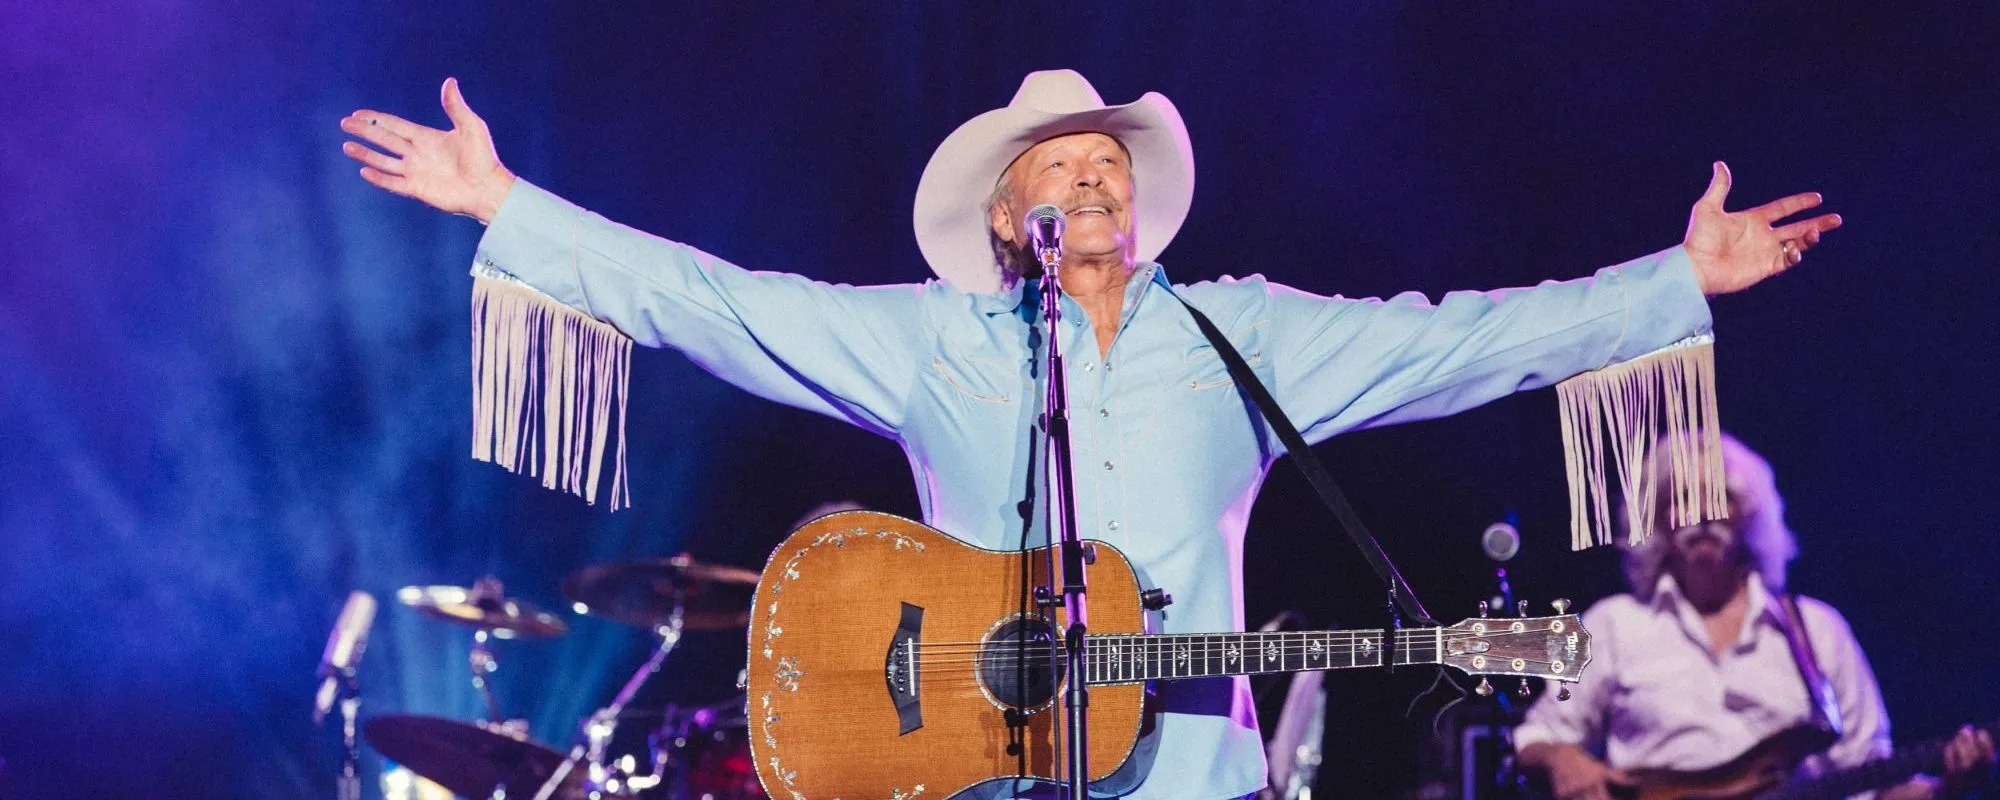 Alan Jackson Supports Hometown with Where I Come From: Tornado Benefit Concert